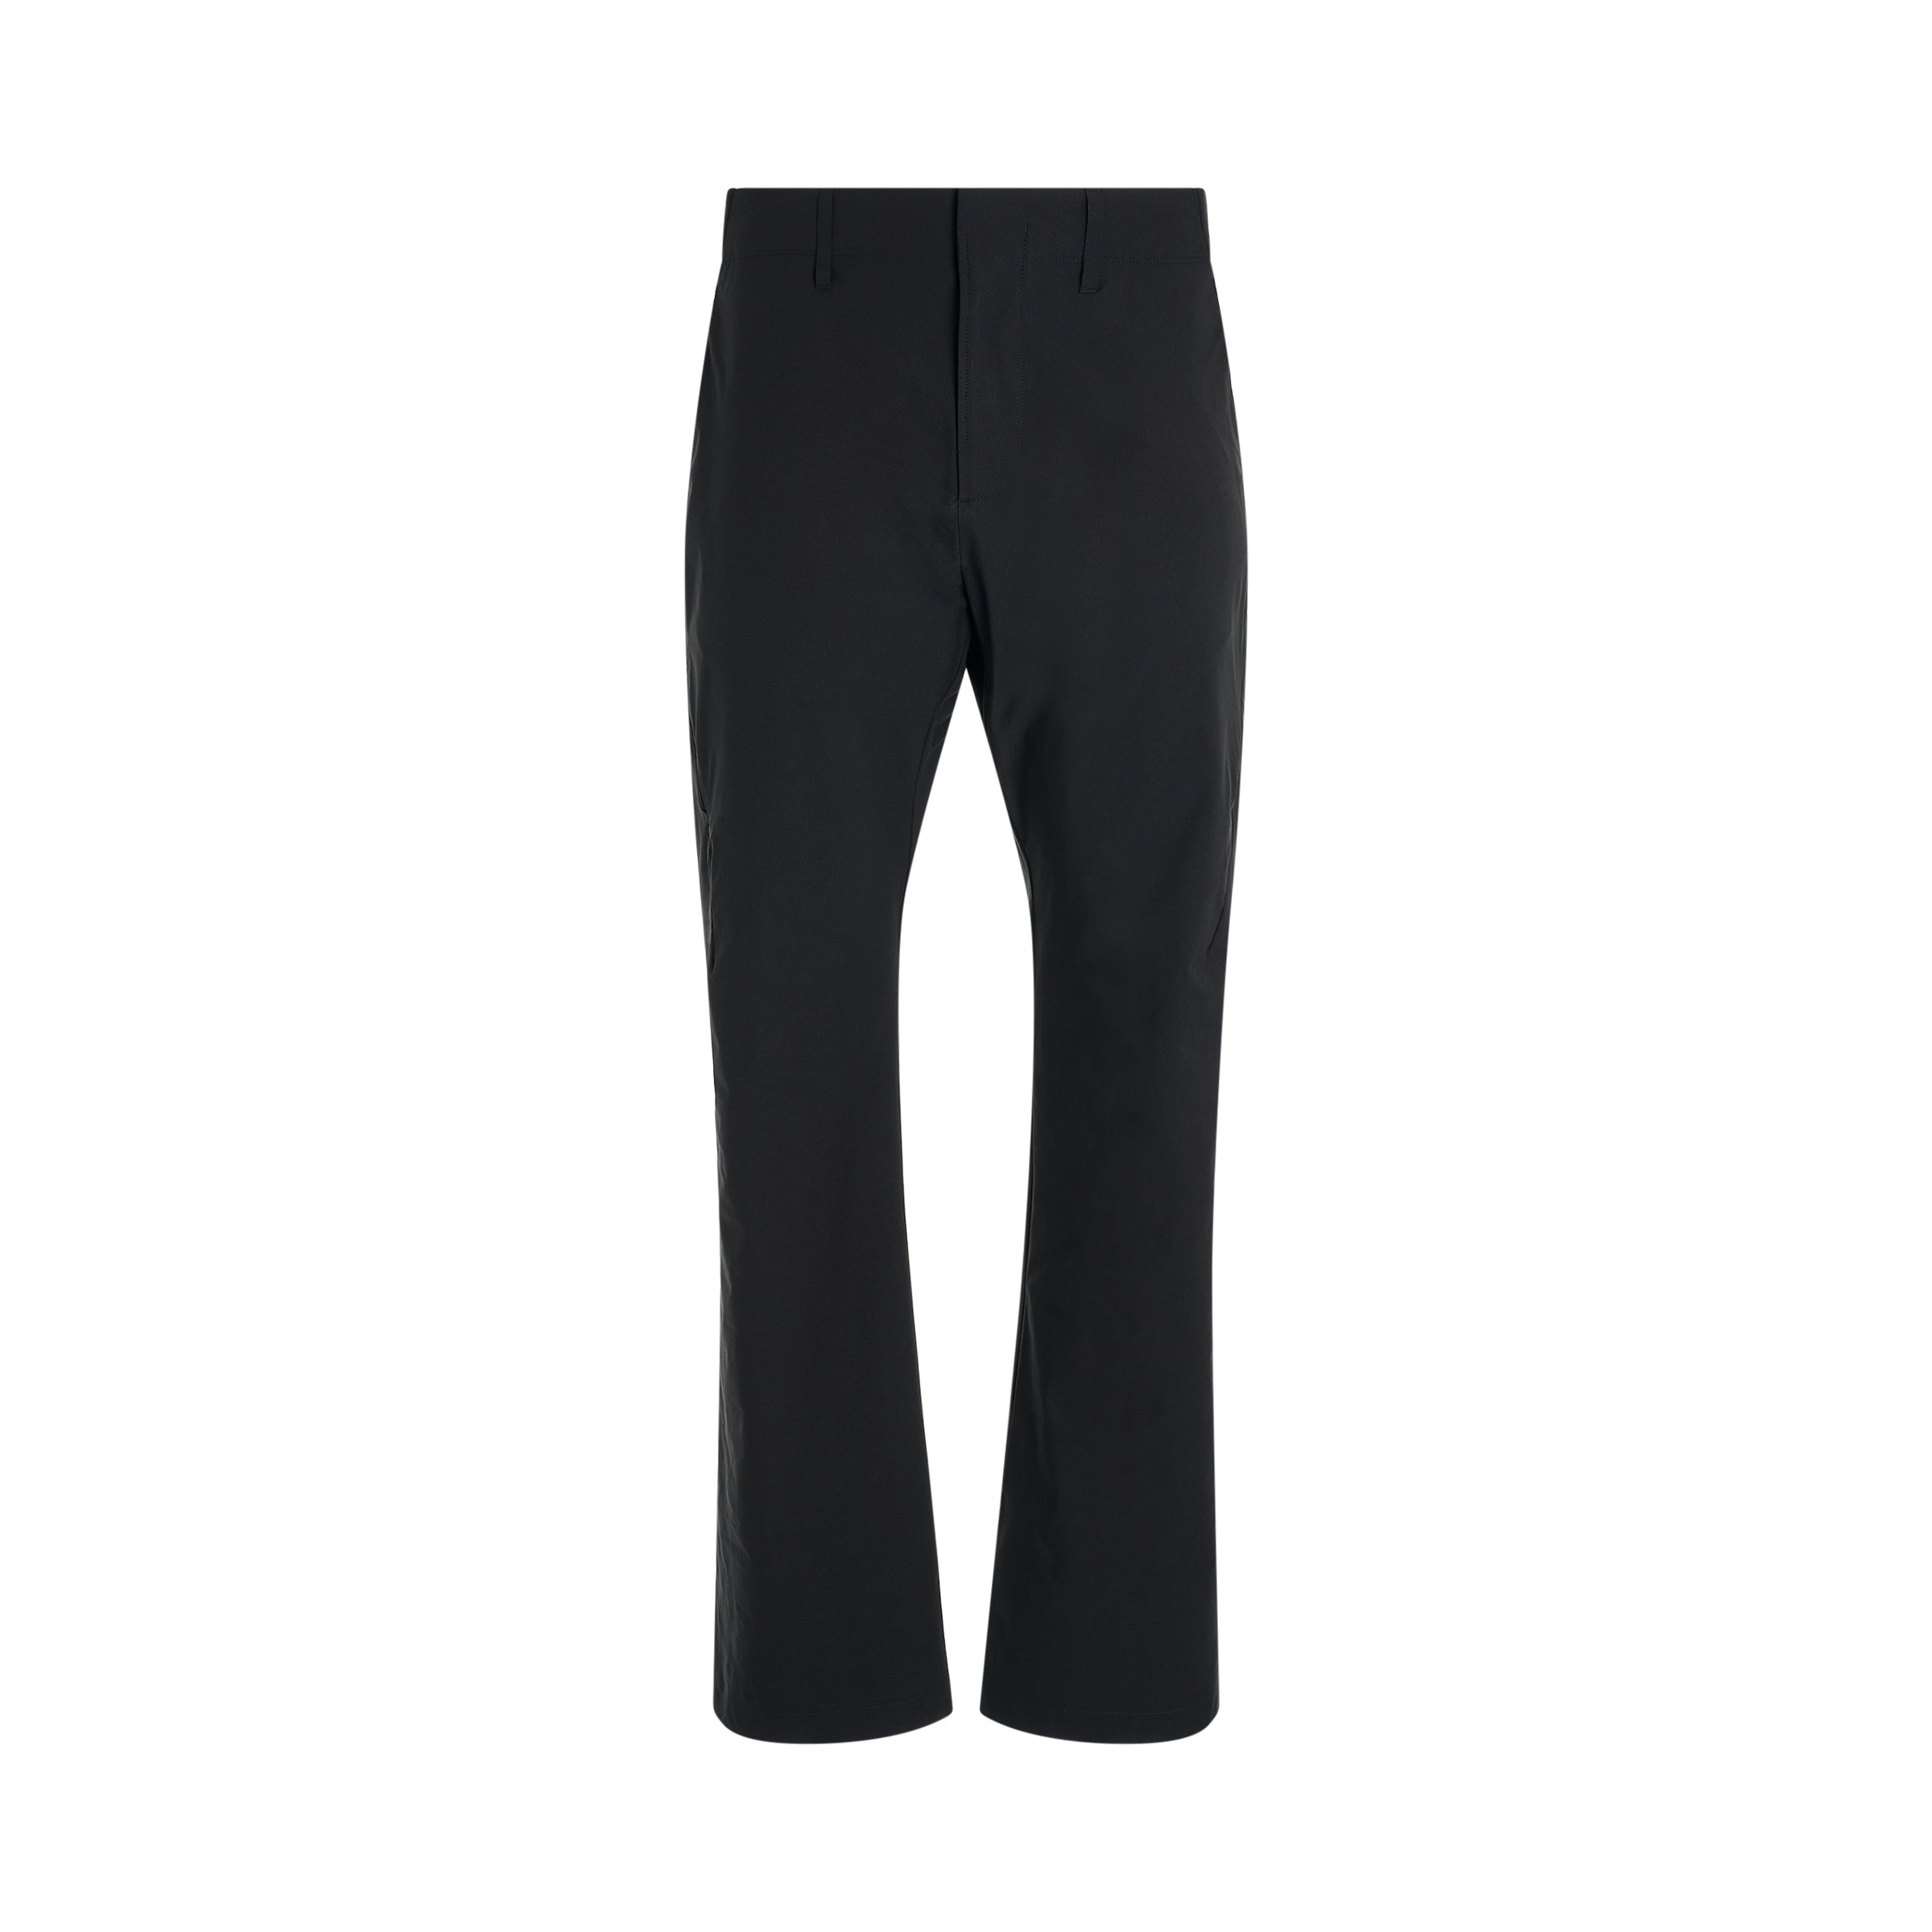 6.0 Technical Pants (Right) in Black - 1